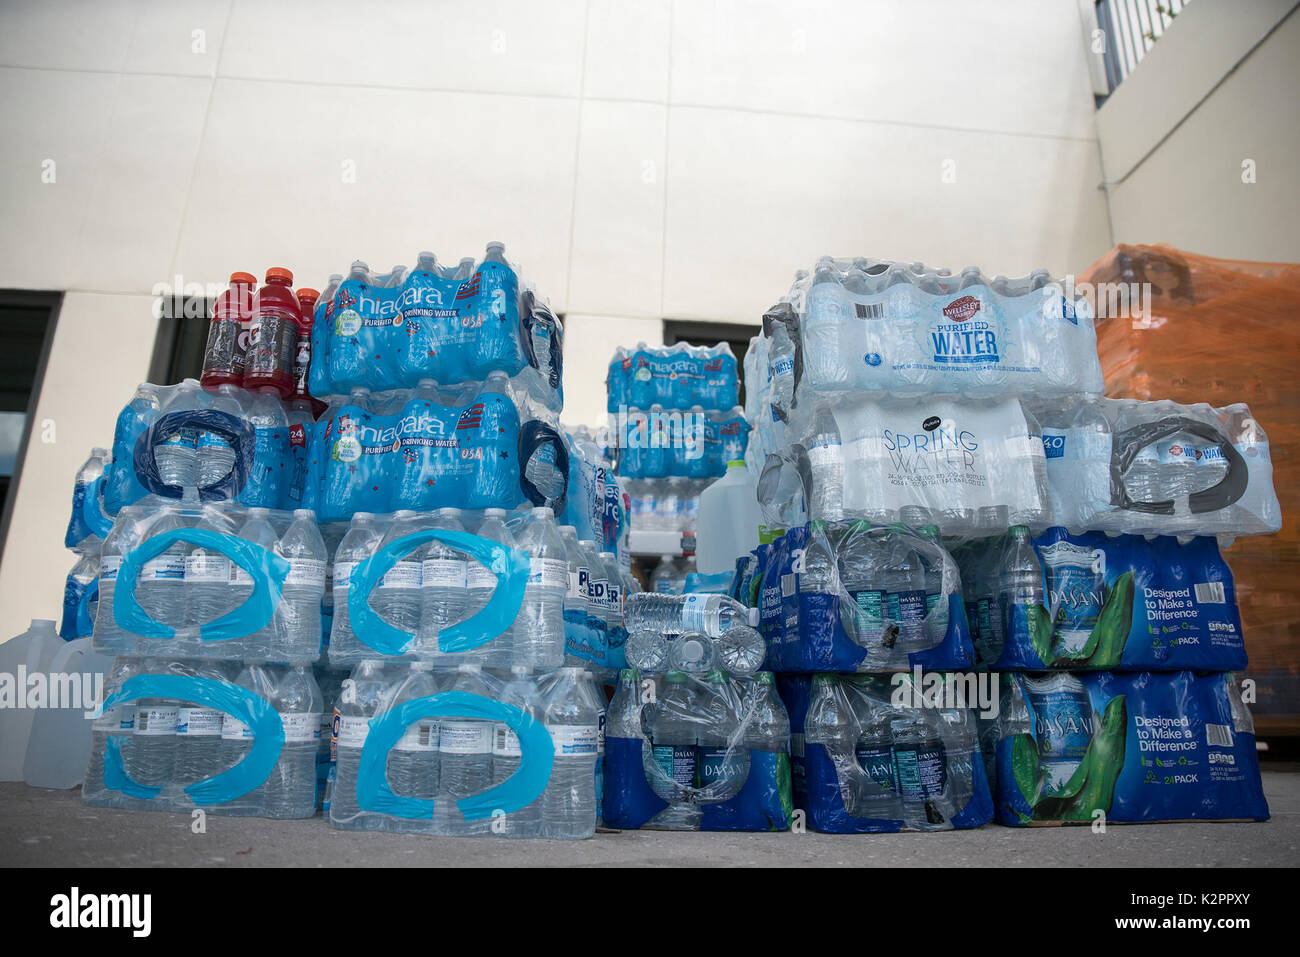 West Palm Beach, Florida, USA. 31st Aug, 2017. Stacks of bottles of water meant for Houston relief efforts await being loaded into trailers at the Ballpark of the Palm Beaches in West Palm Beach, Fla., on Thursday, August 31, 2017. The Houston Astros baseball team is praising Palm Beach County residents for a greater-than-expected response to the team's request for donations to help victims of Hurricane Harvey. The unexpected response has prompted the team to send in a second truck to carry supplies to Texas next week. Credit: Andres Leiva/The Palm Beach Post/ZUMA Wire/Alamy Live News Stock Photo